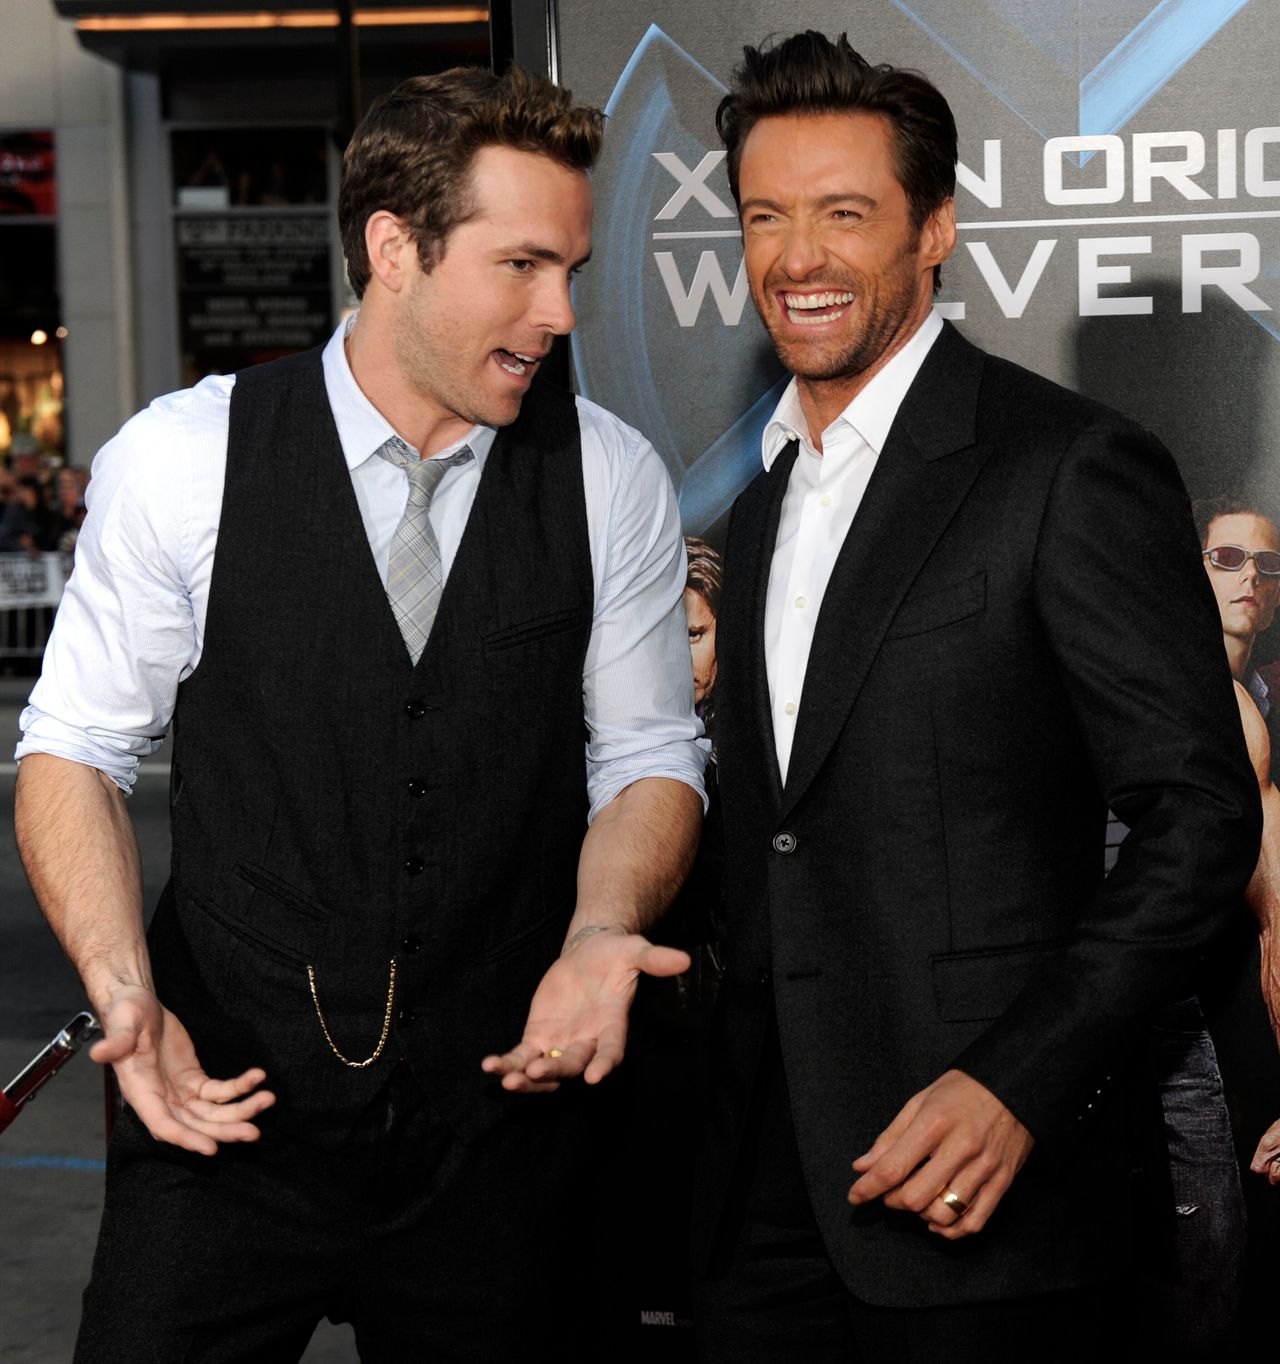 Ryan Reynolds, left, and Hugh Jackman arrive to the "X-Men Origins: Wolverine" screening on Tuesday April 28, 2009, in Los Angeles. (AP Photo/Chris Pizzello)